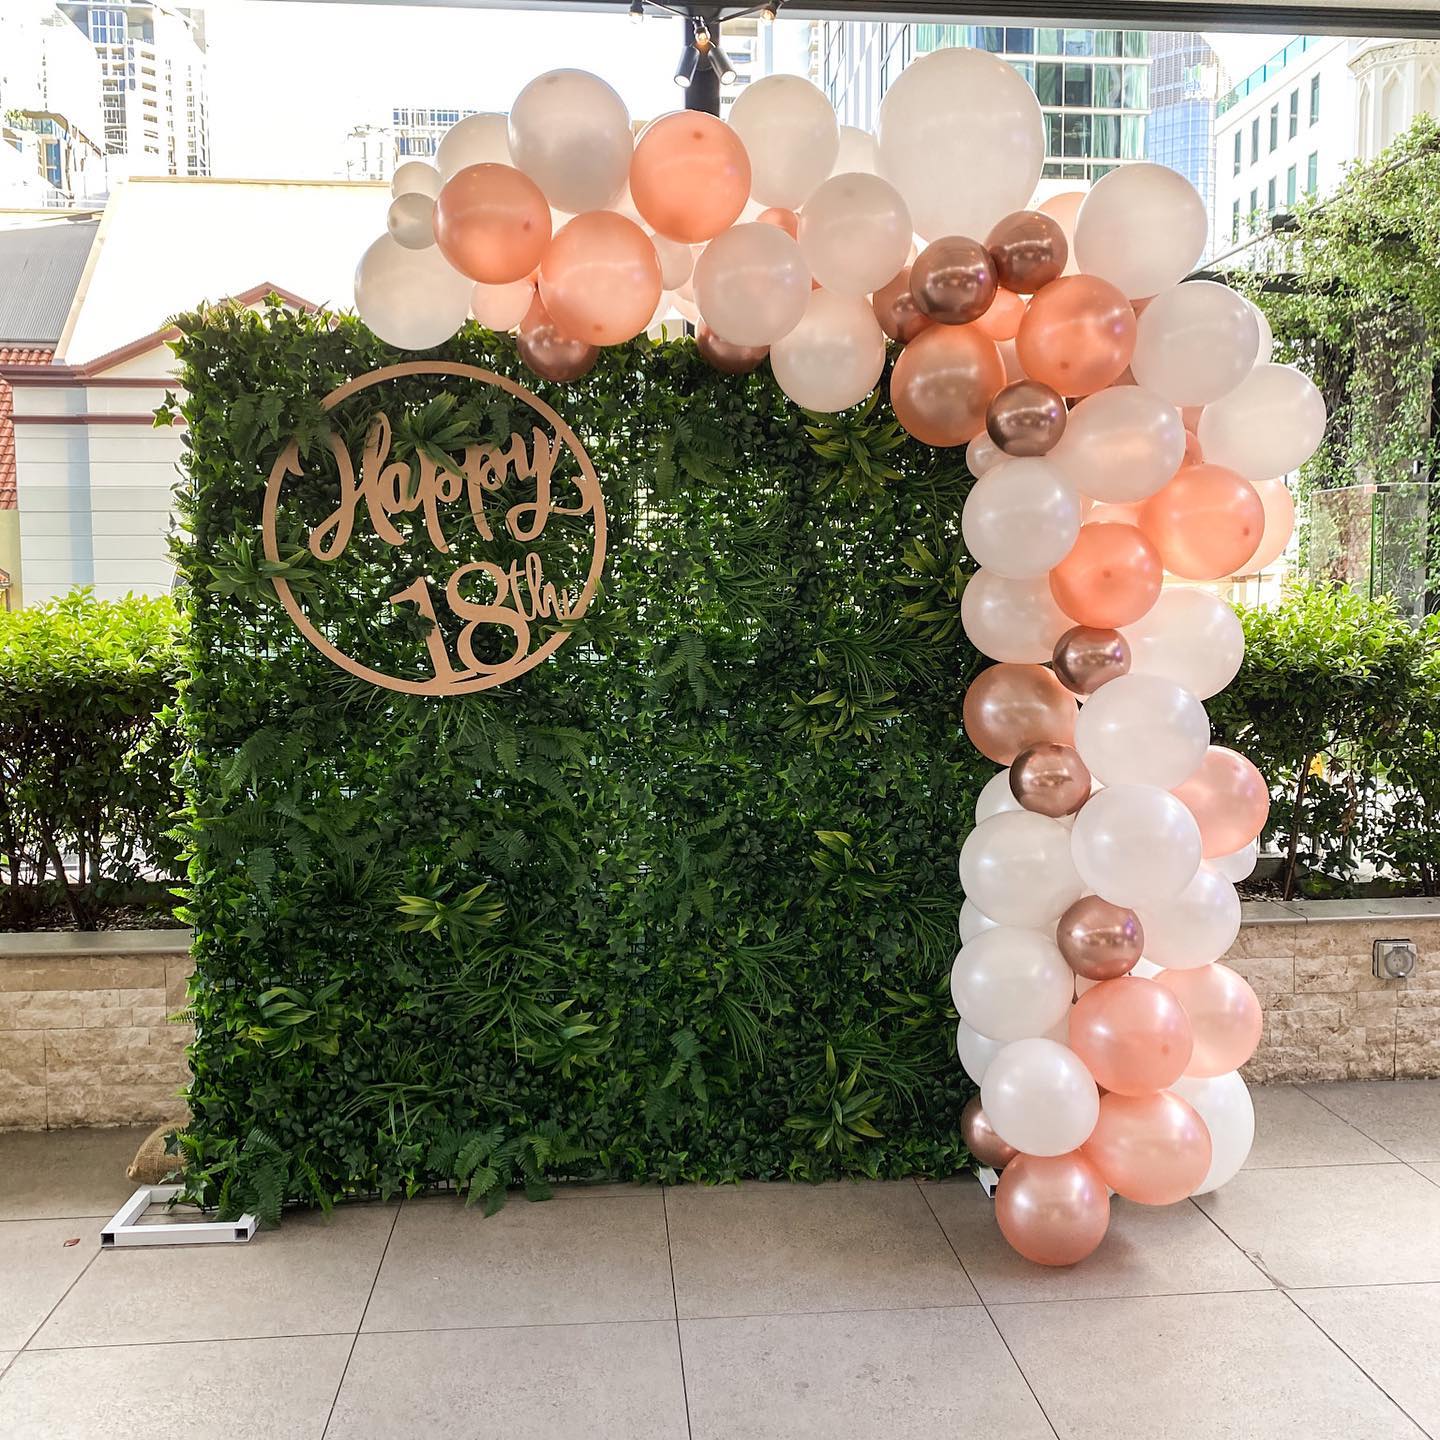 Just Peachy Event Hire